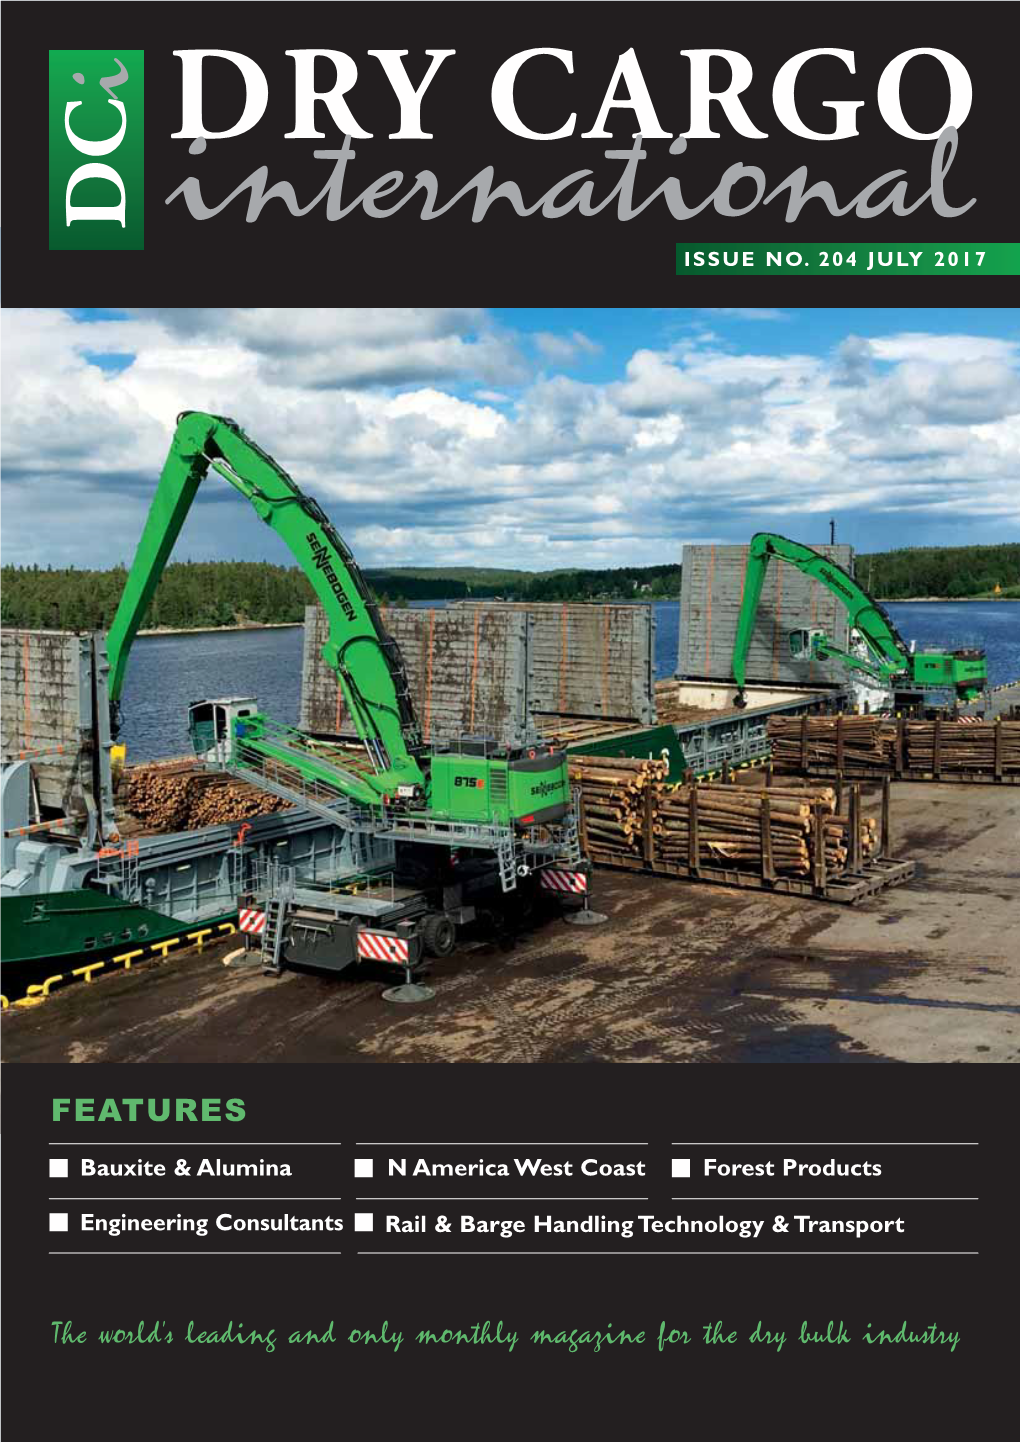 The World's Leading and Only Monthly Magazine for the Dry Bulk